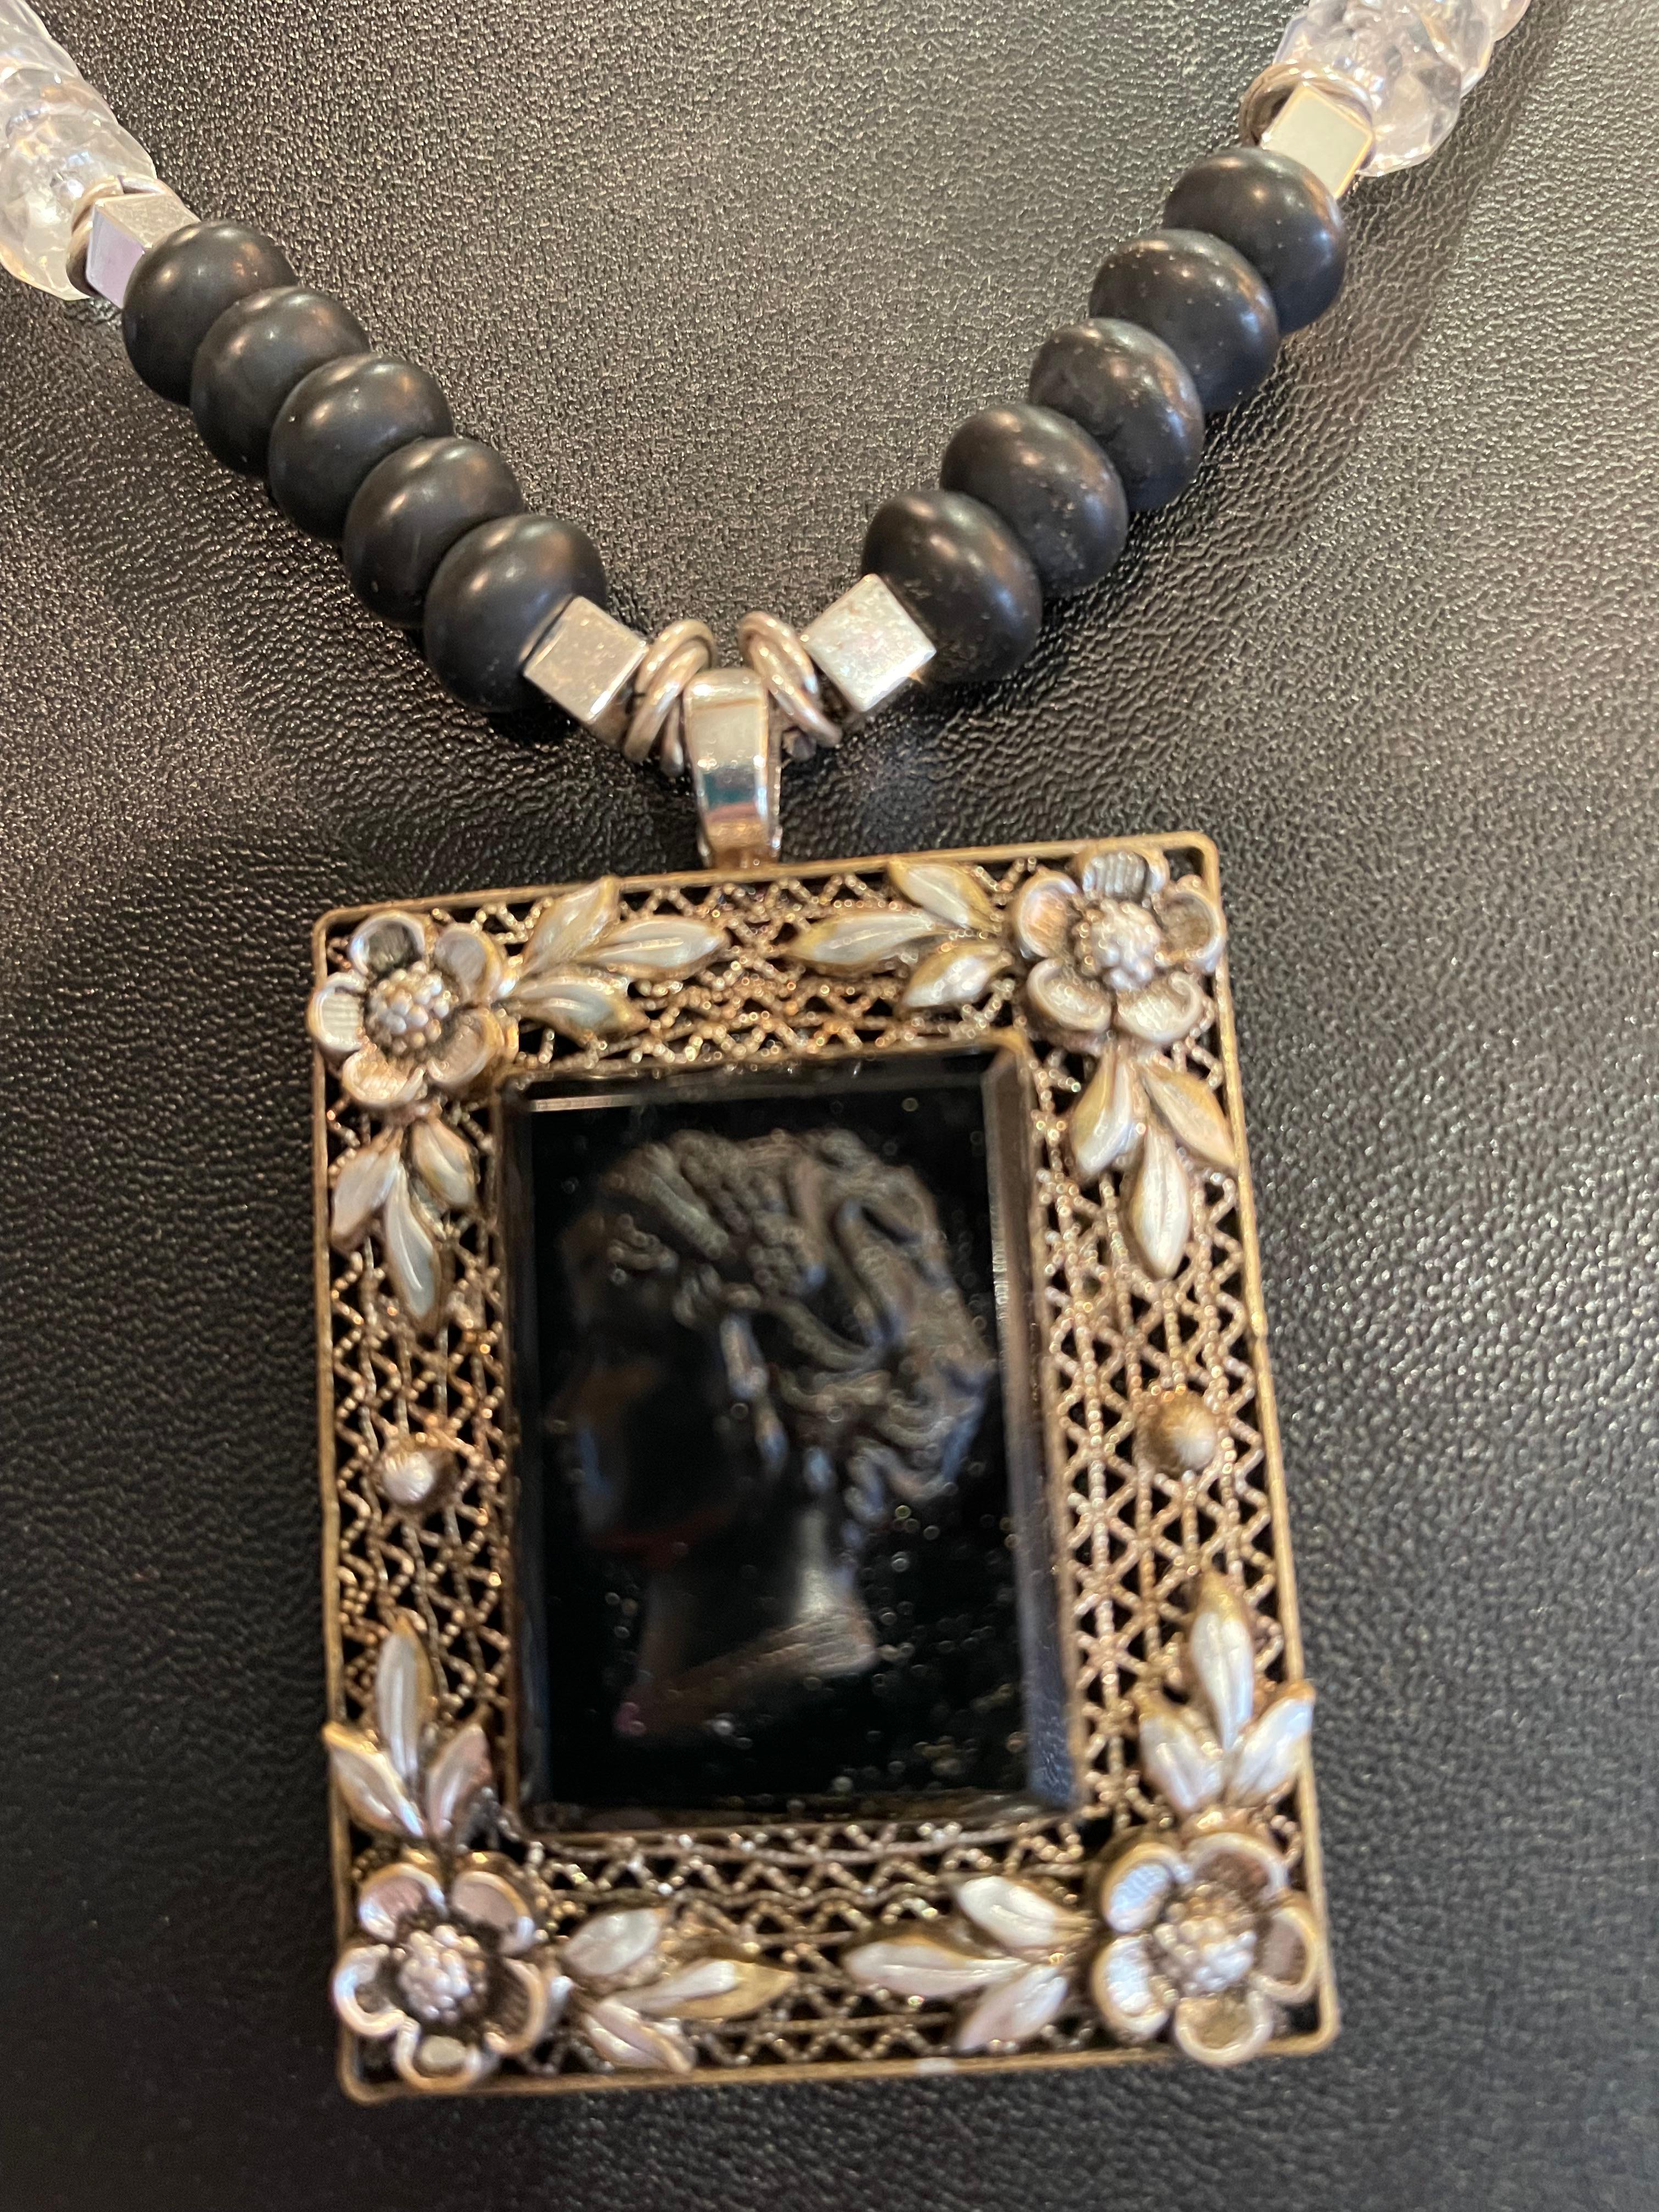 Lorraine’s Bijoux has on offer a Vintage Czech glass and Sterling Silver Cameo pendant necklace. This one of a kind, handmade necklace is unusual and very feminine. The sterling silver filigree work flanking the black glass cameo is very intricate